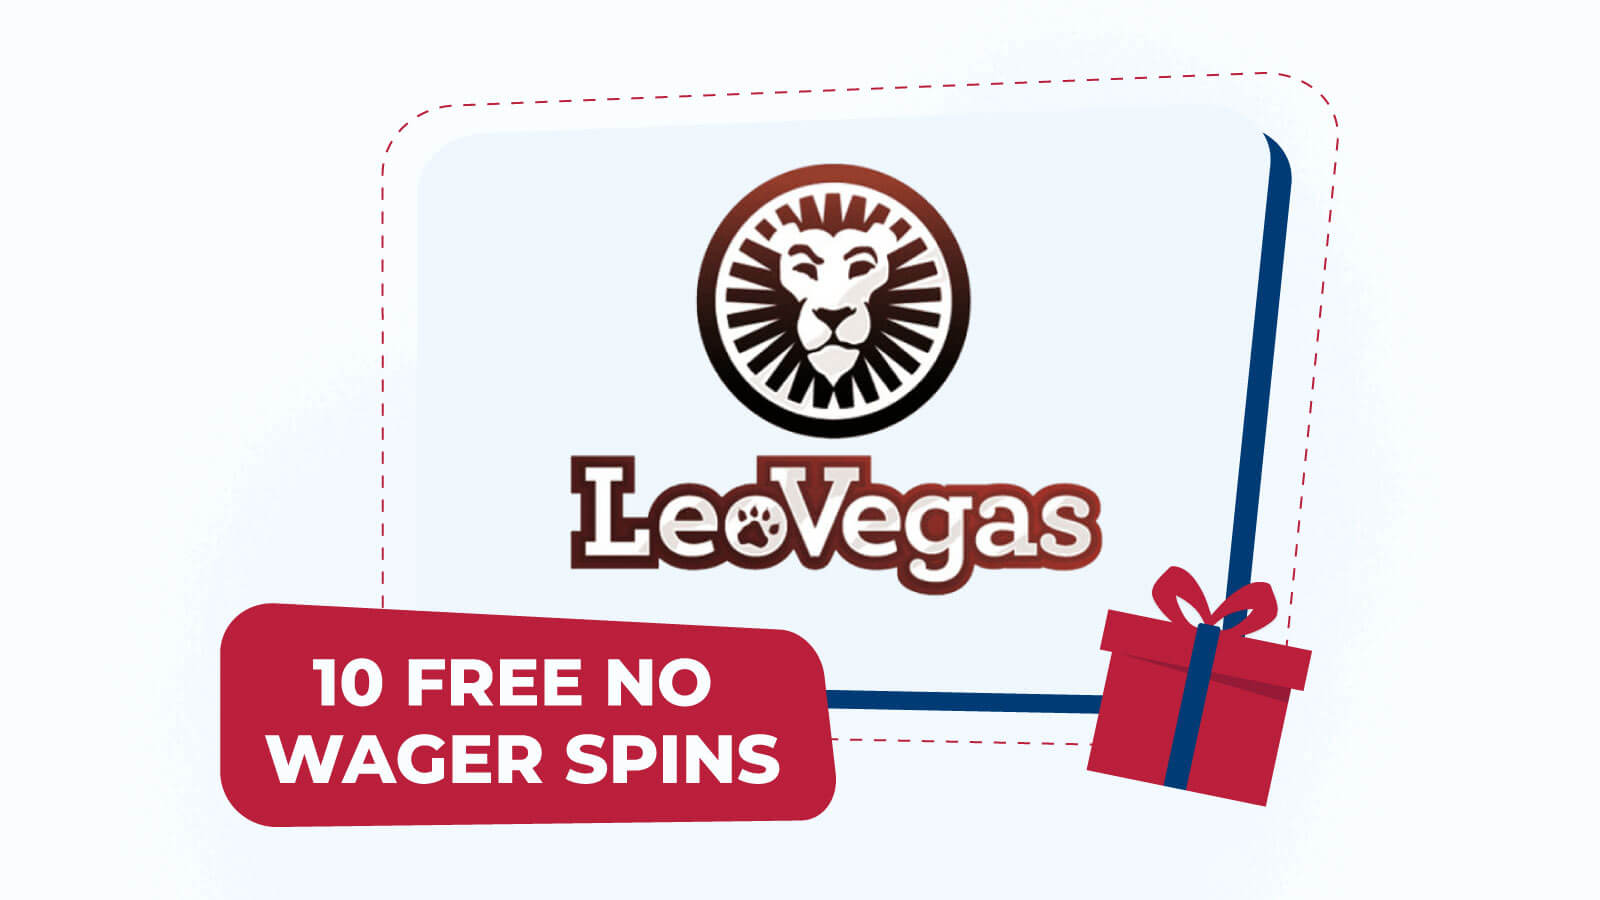 10 free no wager spins at LeoVegas – best Microgaming bonus for mobile